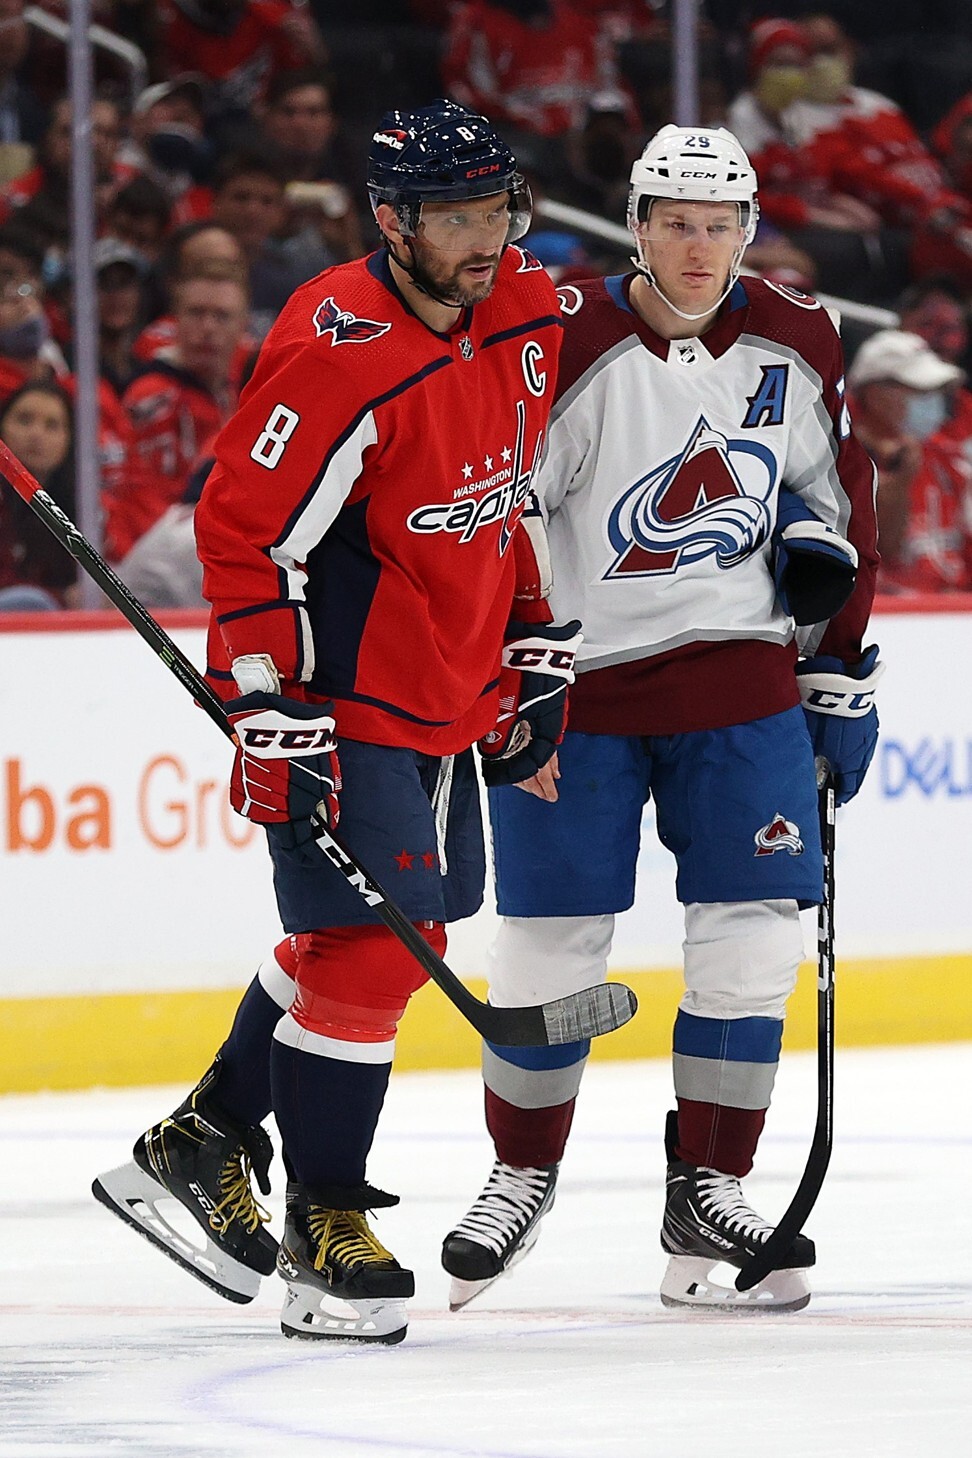 Nathan MacKinnon needs to channel Alexander Ovechkin if he wants to finally break through in the NHL with a Stanley Cup and that could start with a solid Olympics performance. Photo: AFP